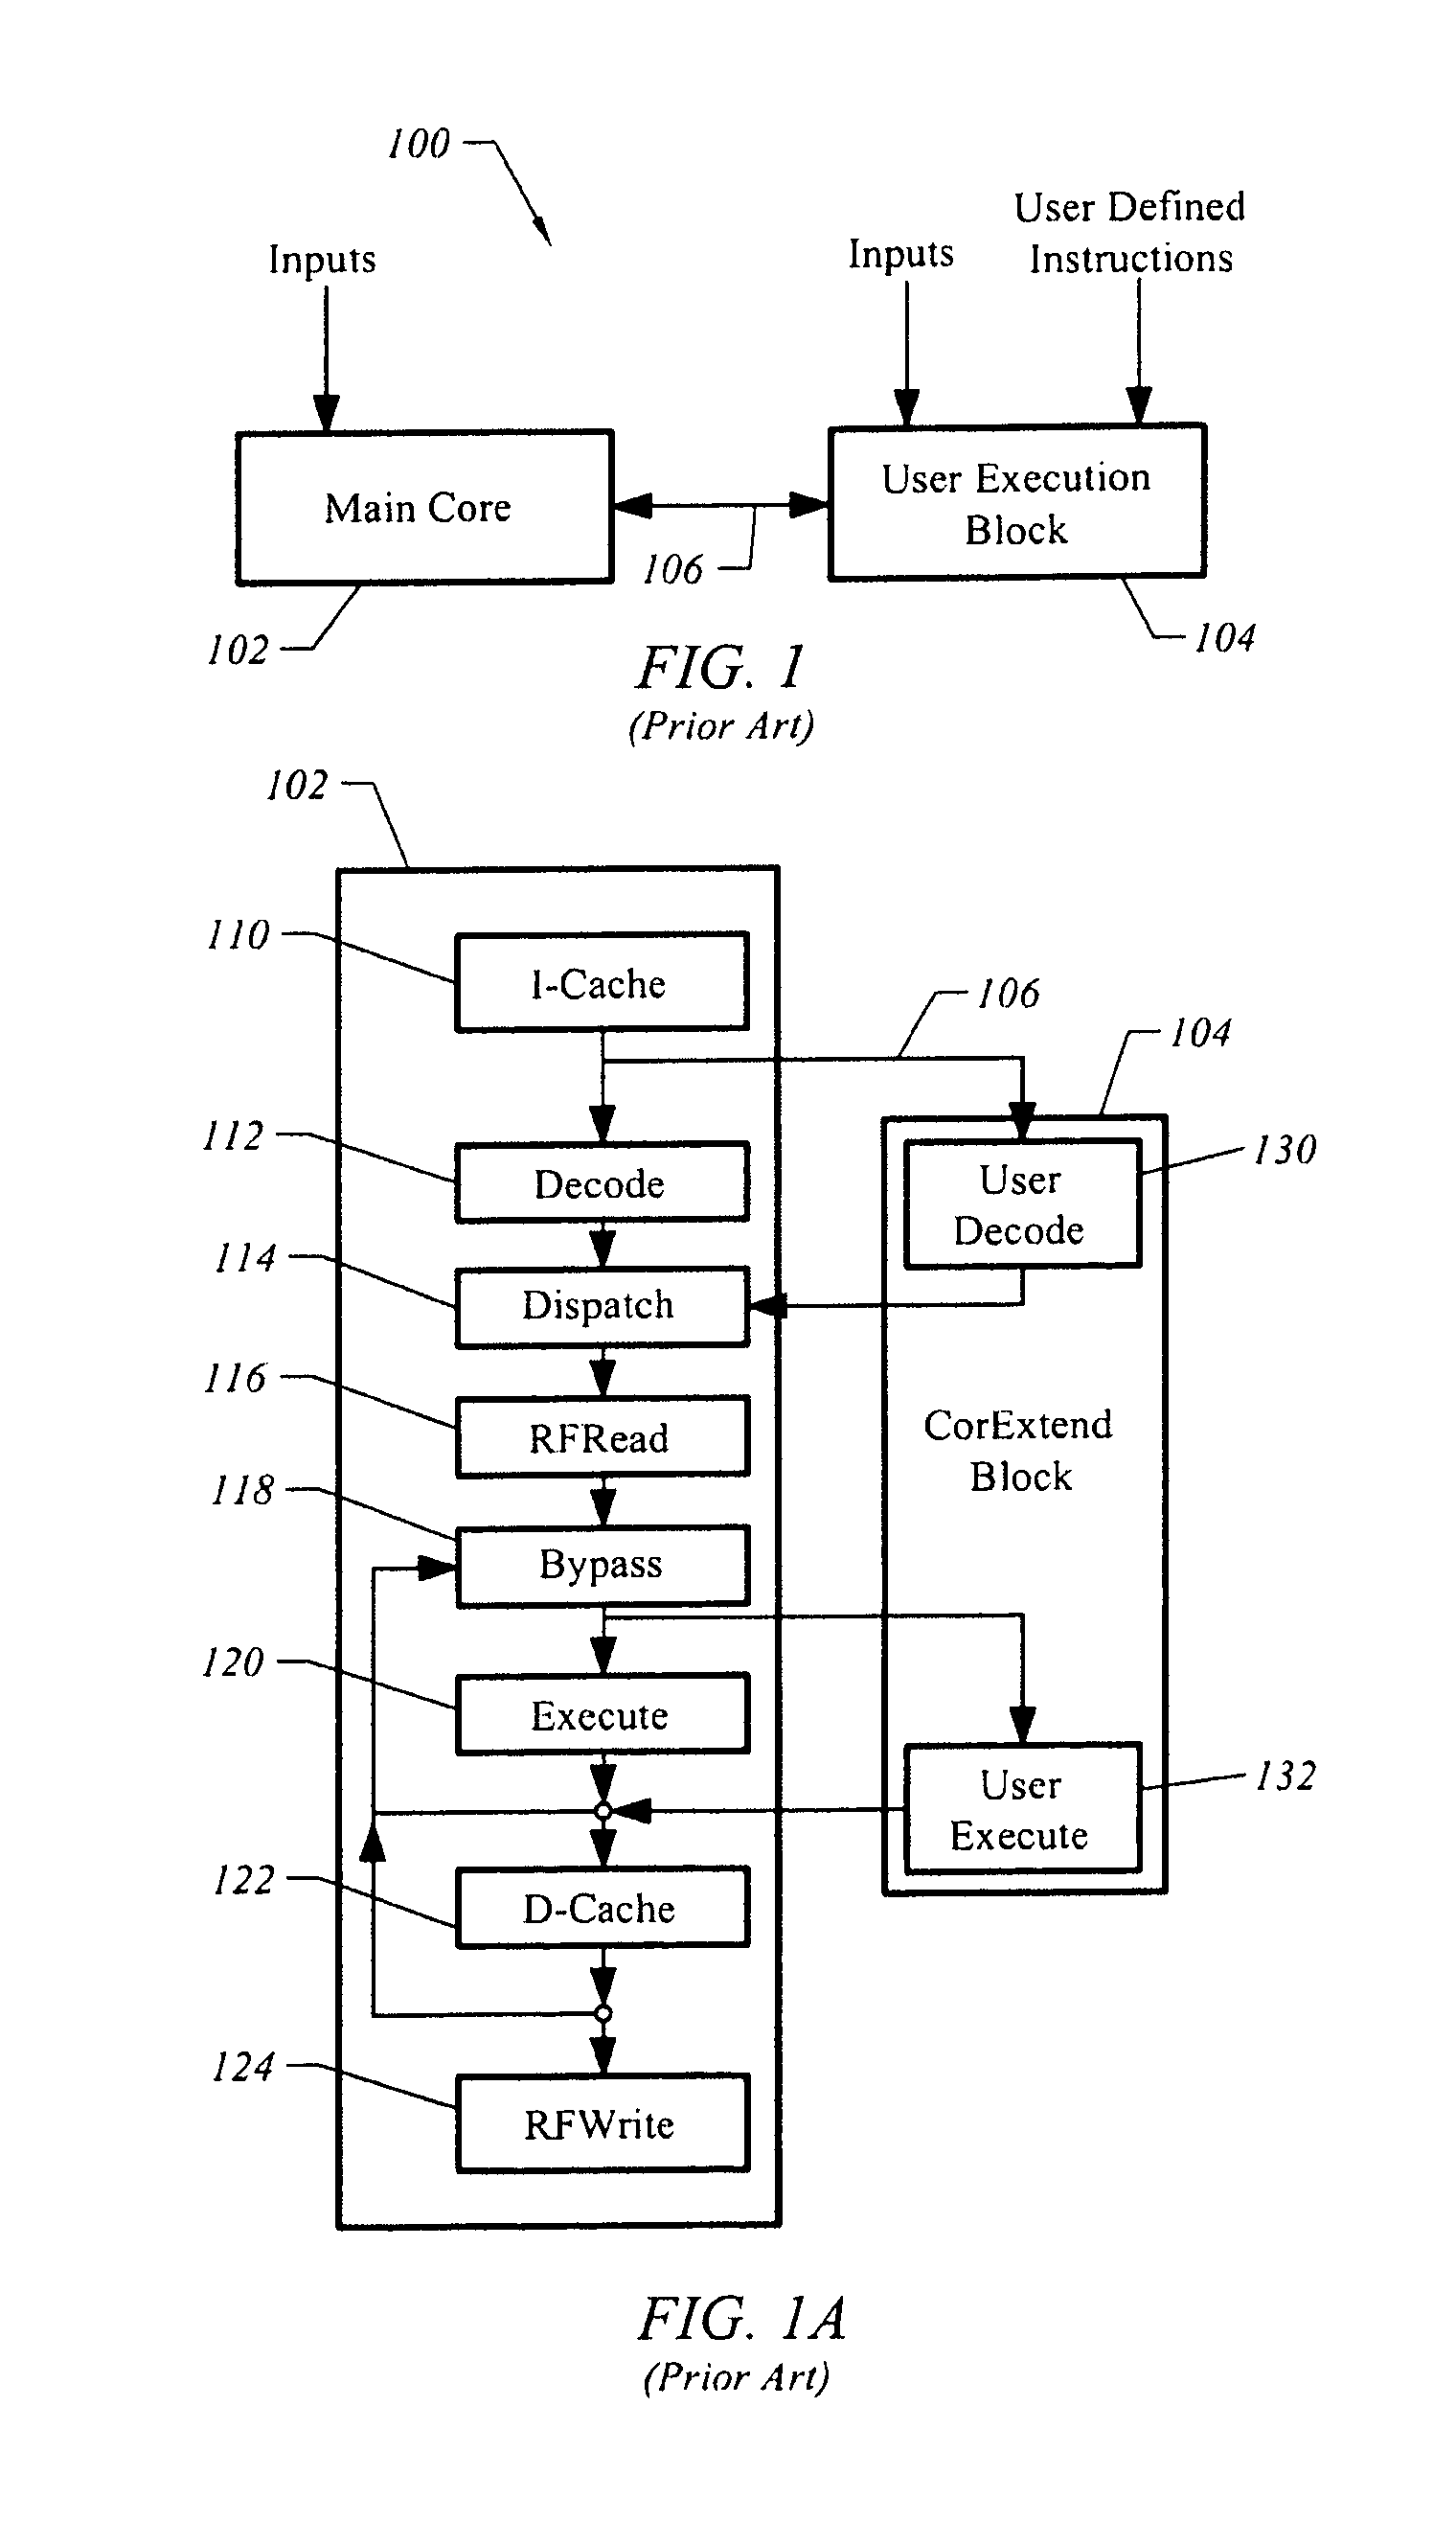 Apparatus and method for processing template based user defined instructions